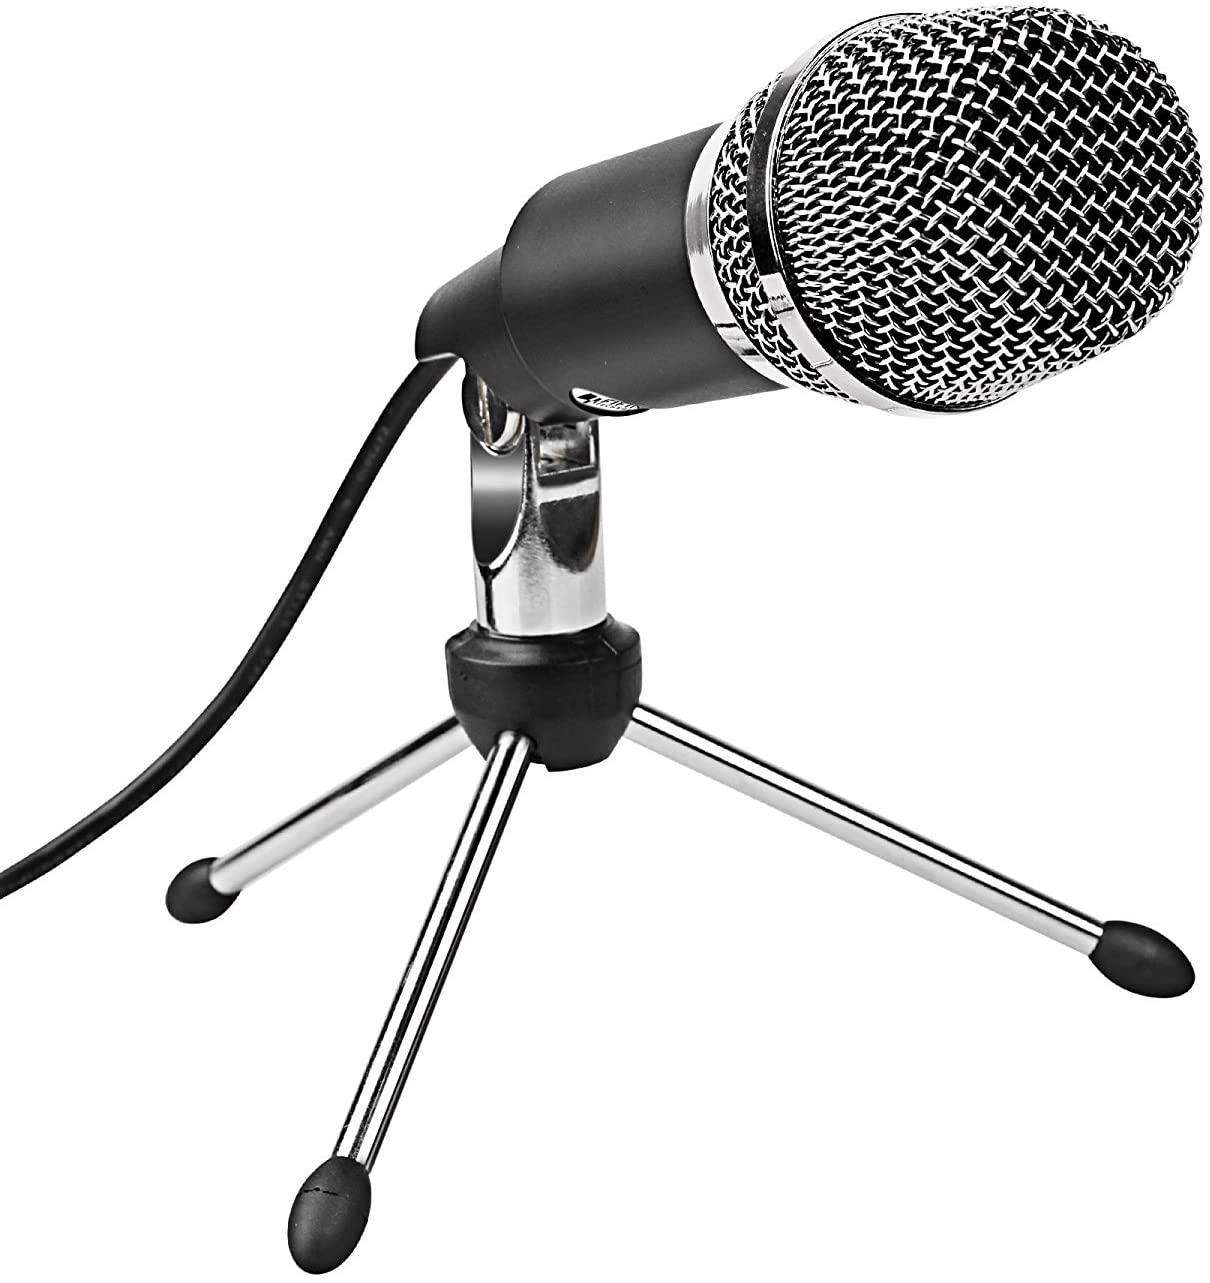 Fifine K668 Plug and Play Home Studio USB Condenser Microphone for Skype, Recordings for YouTube, Google Voice Search, Games